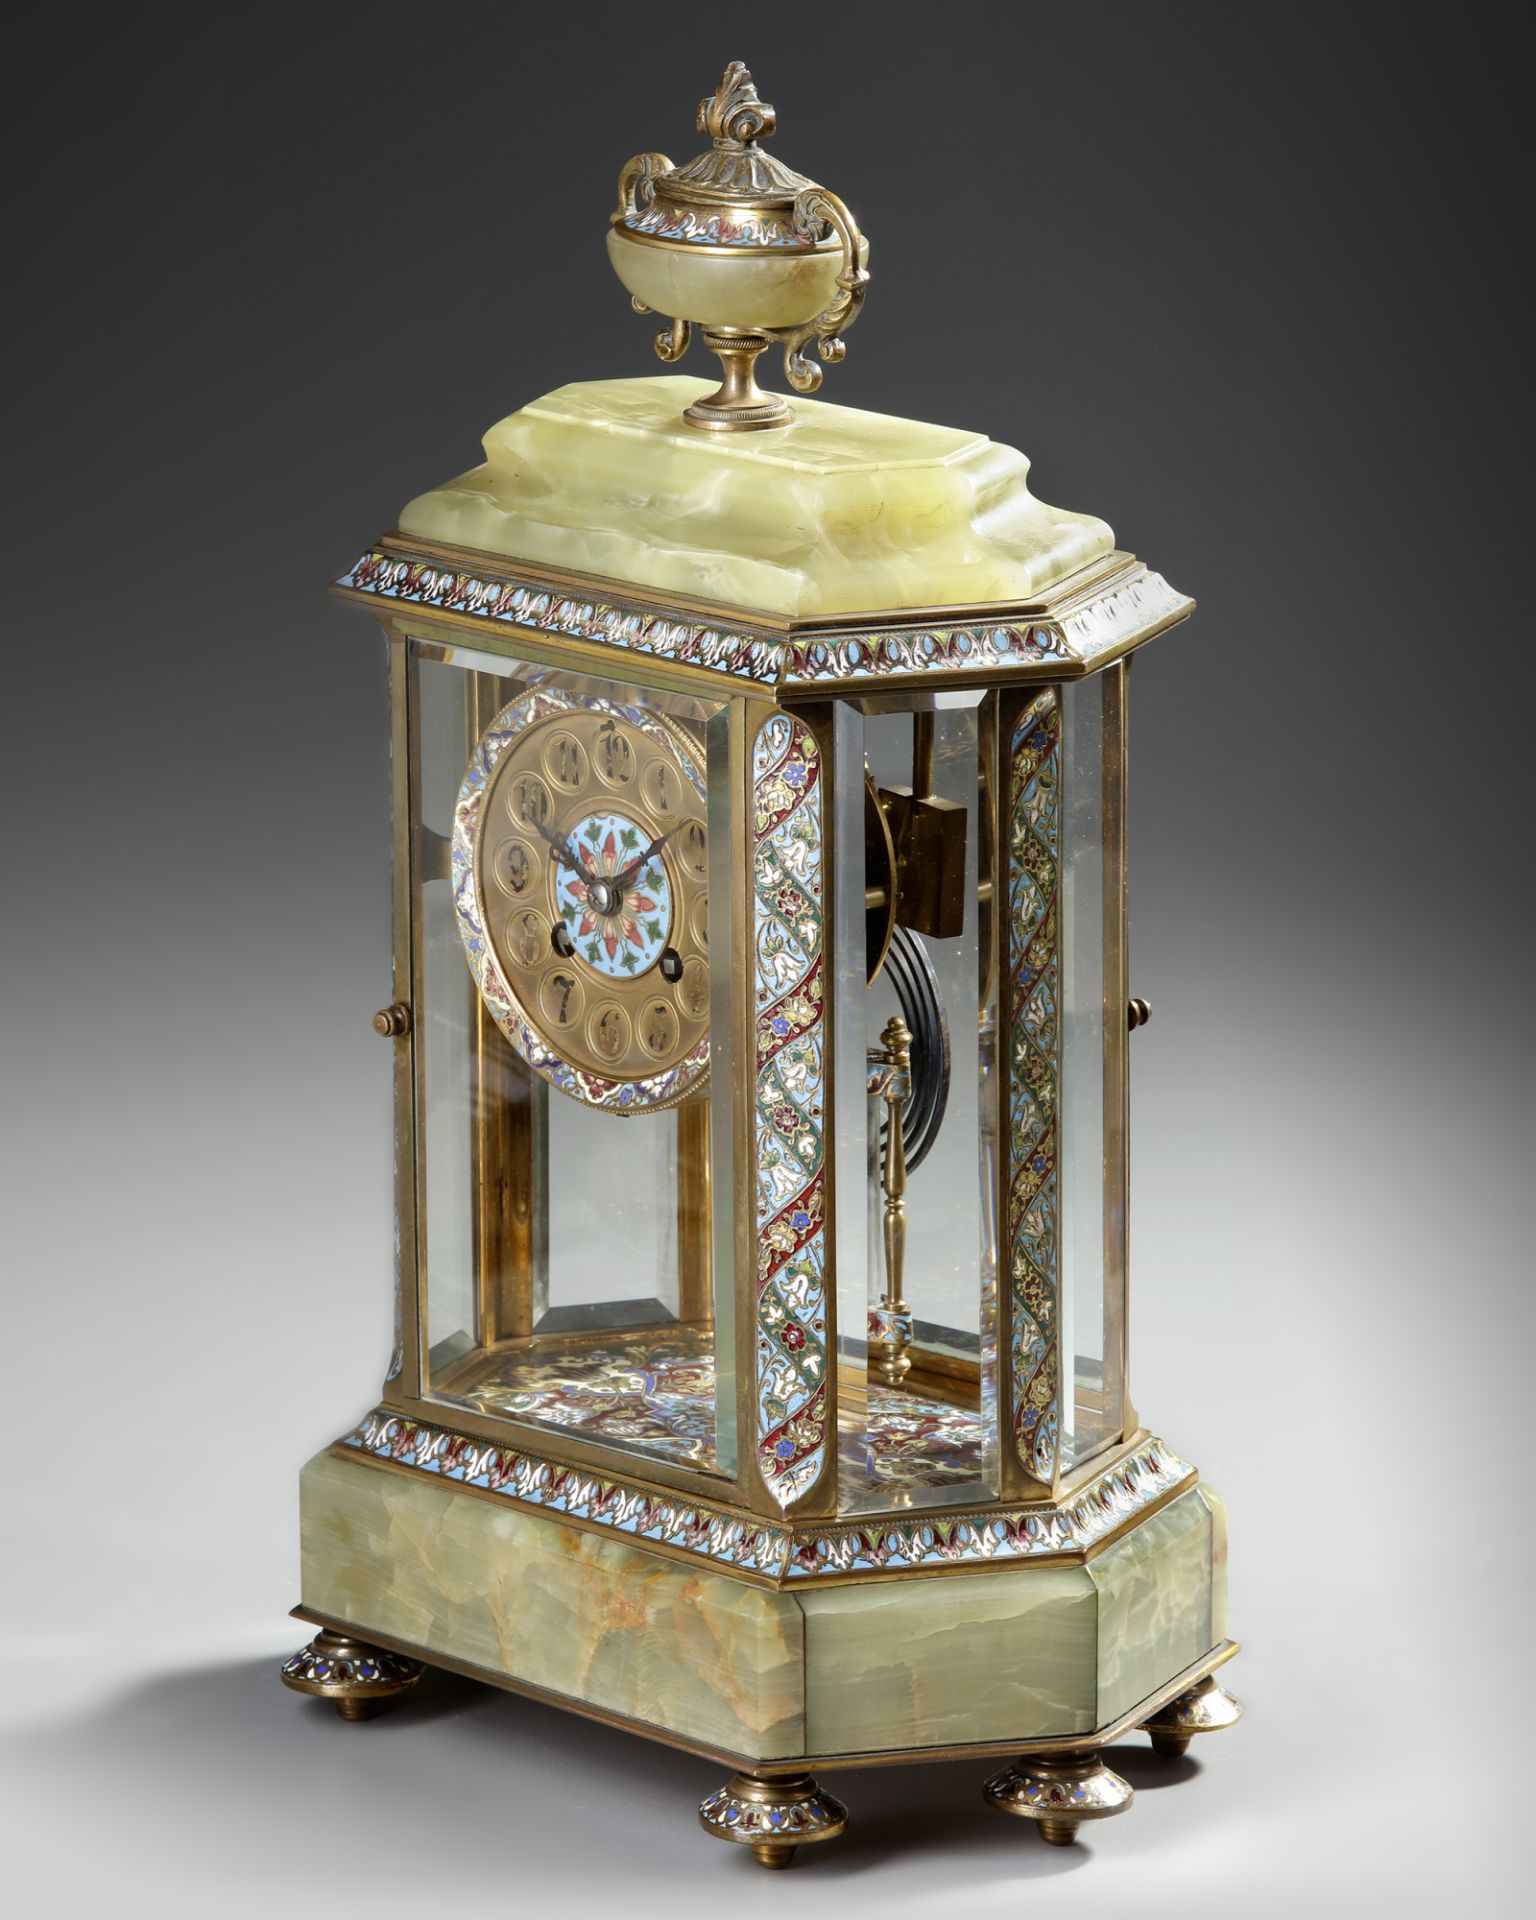 A FRENCH BRONZE AND CHAMPLEVÉ ENAMEL MANTEL CLOCK, 19TH CENTURY - Image 2 of 3